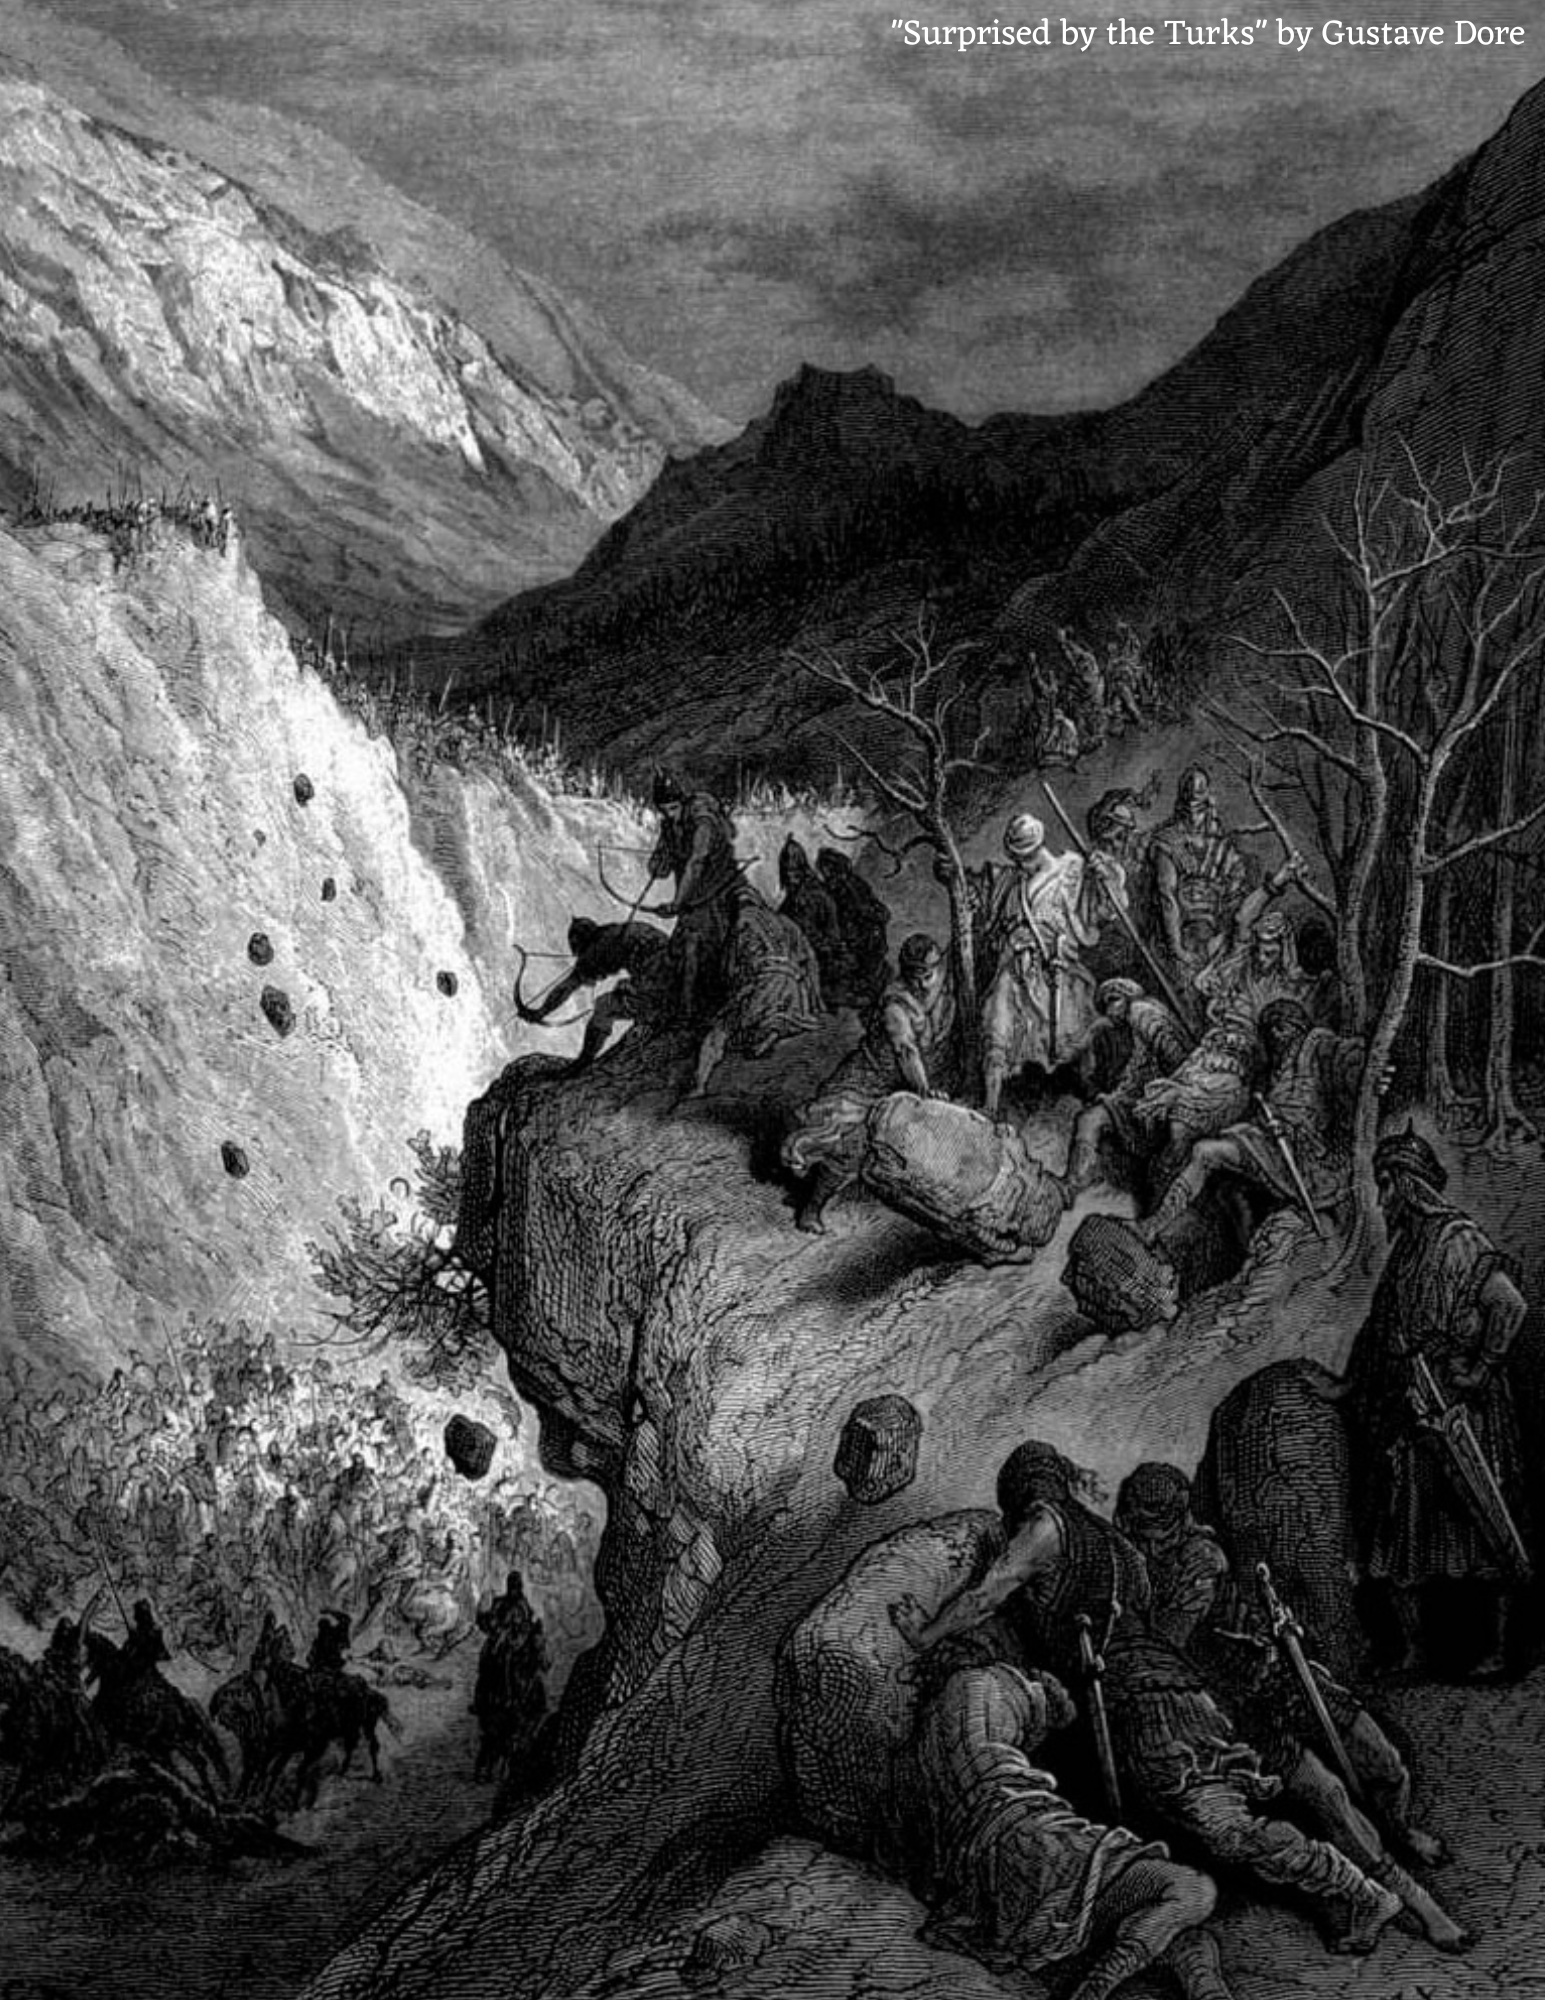 Surprised by the Turks, by Gustave Dore